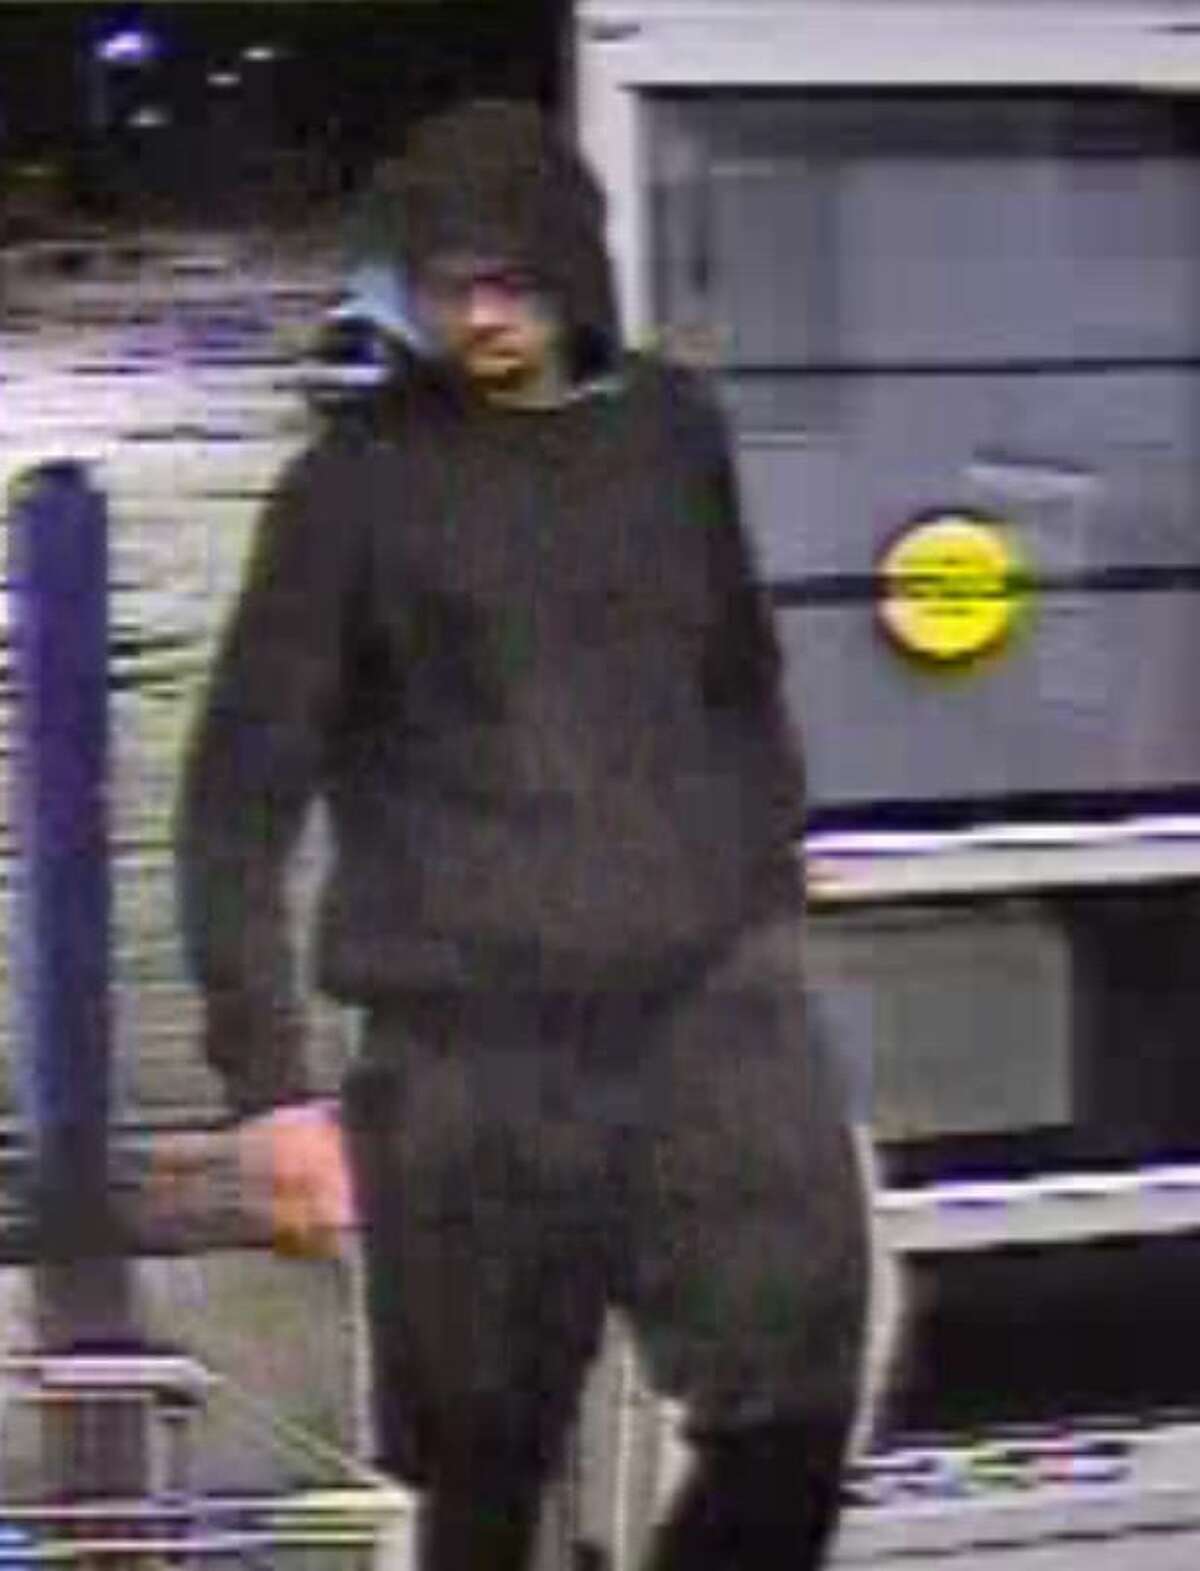 The Montgomery County Sheriff’s Office is looking for this man in connection with the robbery of the Wal-Mart located on Sawdust Road.